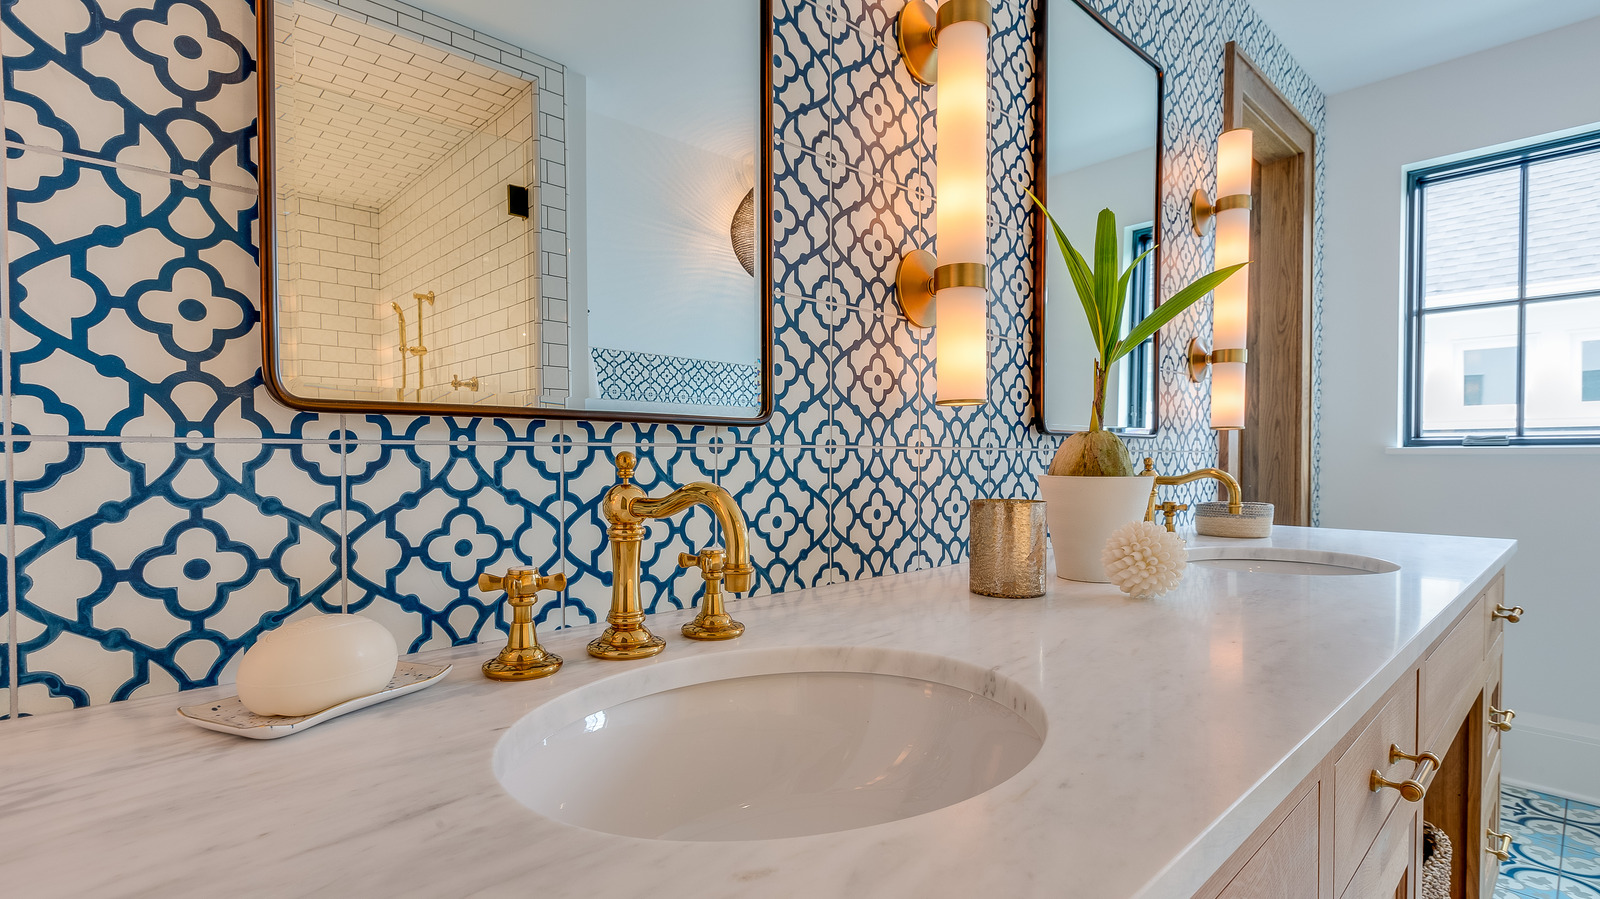 4 Reasons You Should Use Black Subway Tile in Your Bathroom